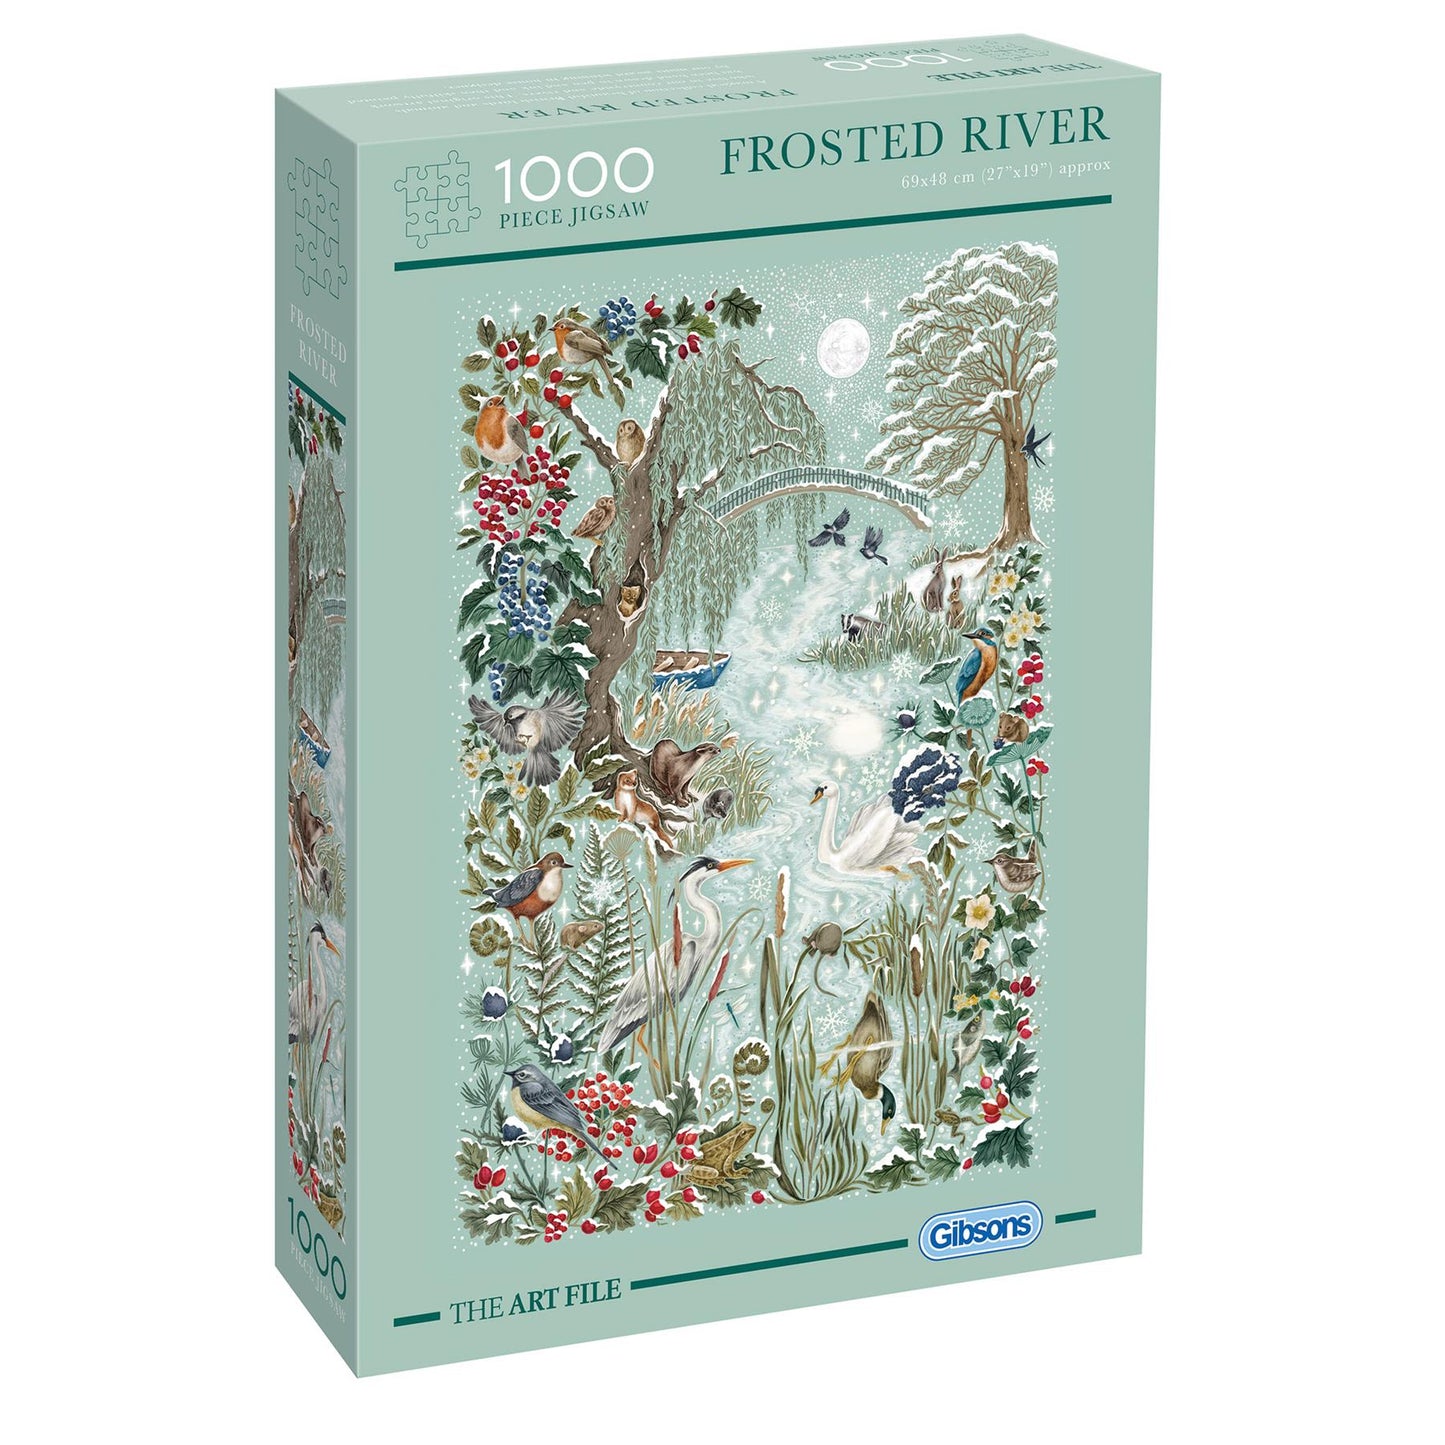 Frosted River 1000 Piece Jigsaw Puzzle